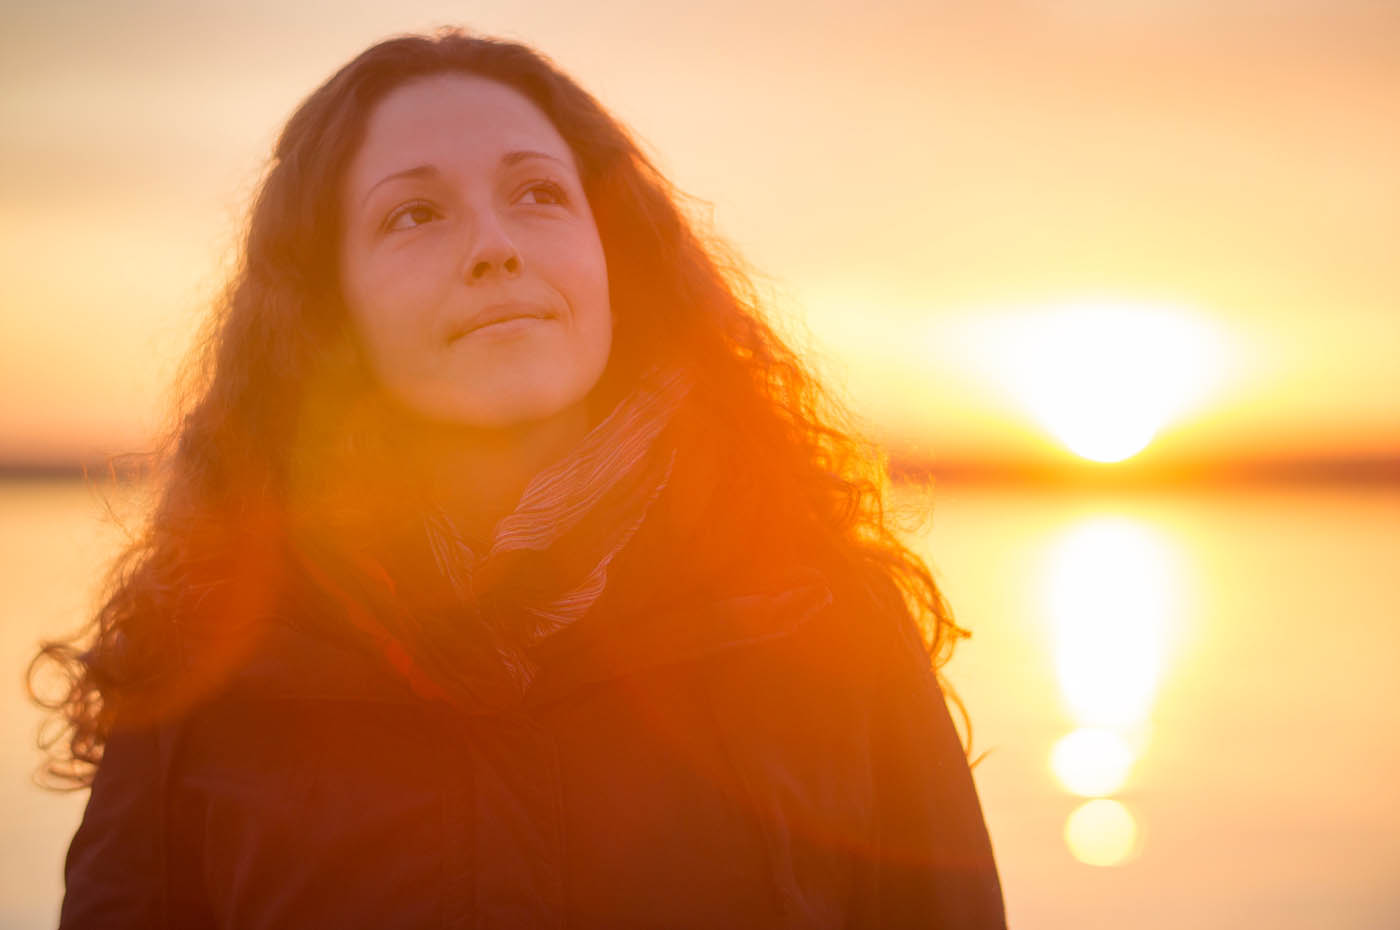 A women standing in front of a red light sunset, learn the benefits of light therapy in your local area.